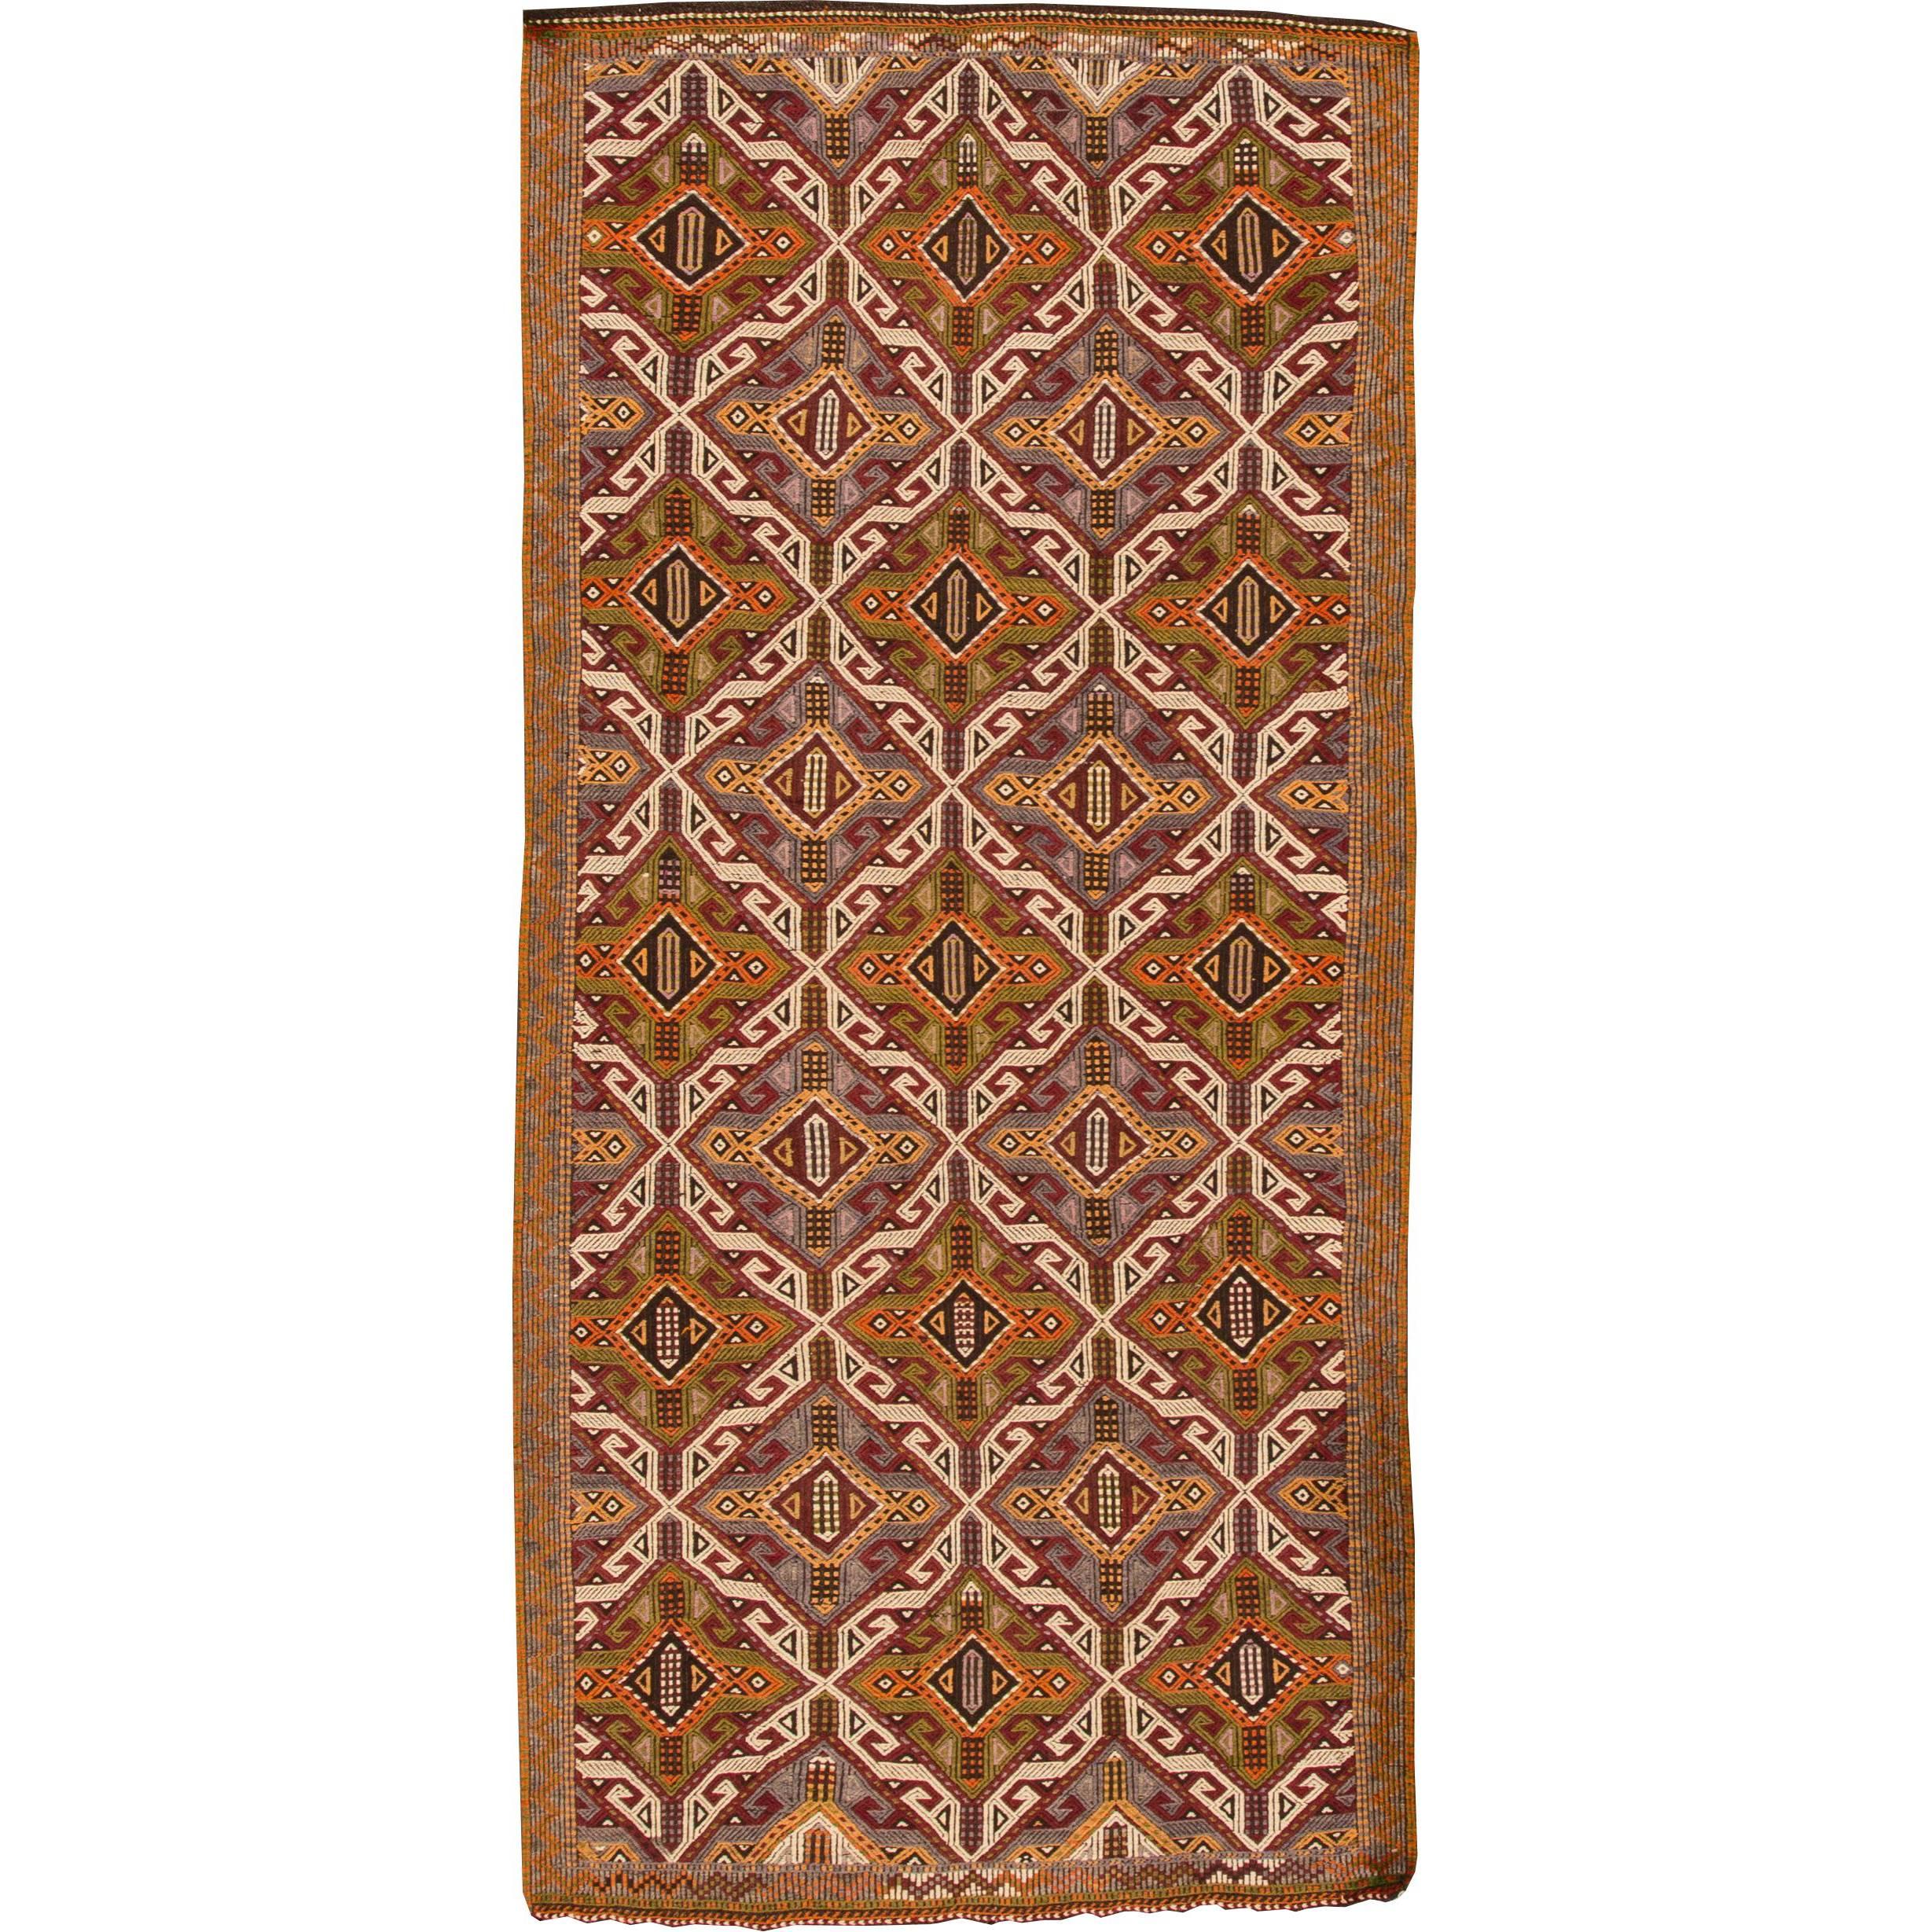 A hand-knotted Sumahk rug with a geometric design on a brown field. Accents of orange, beige and green throughout the piece. This rug measures 4'.11 x 10'.6.